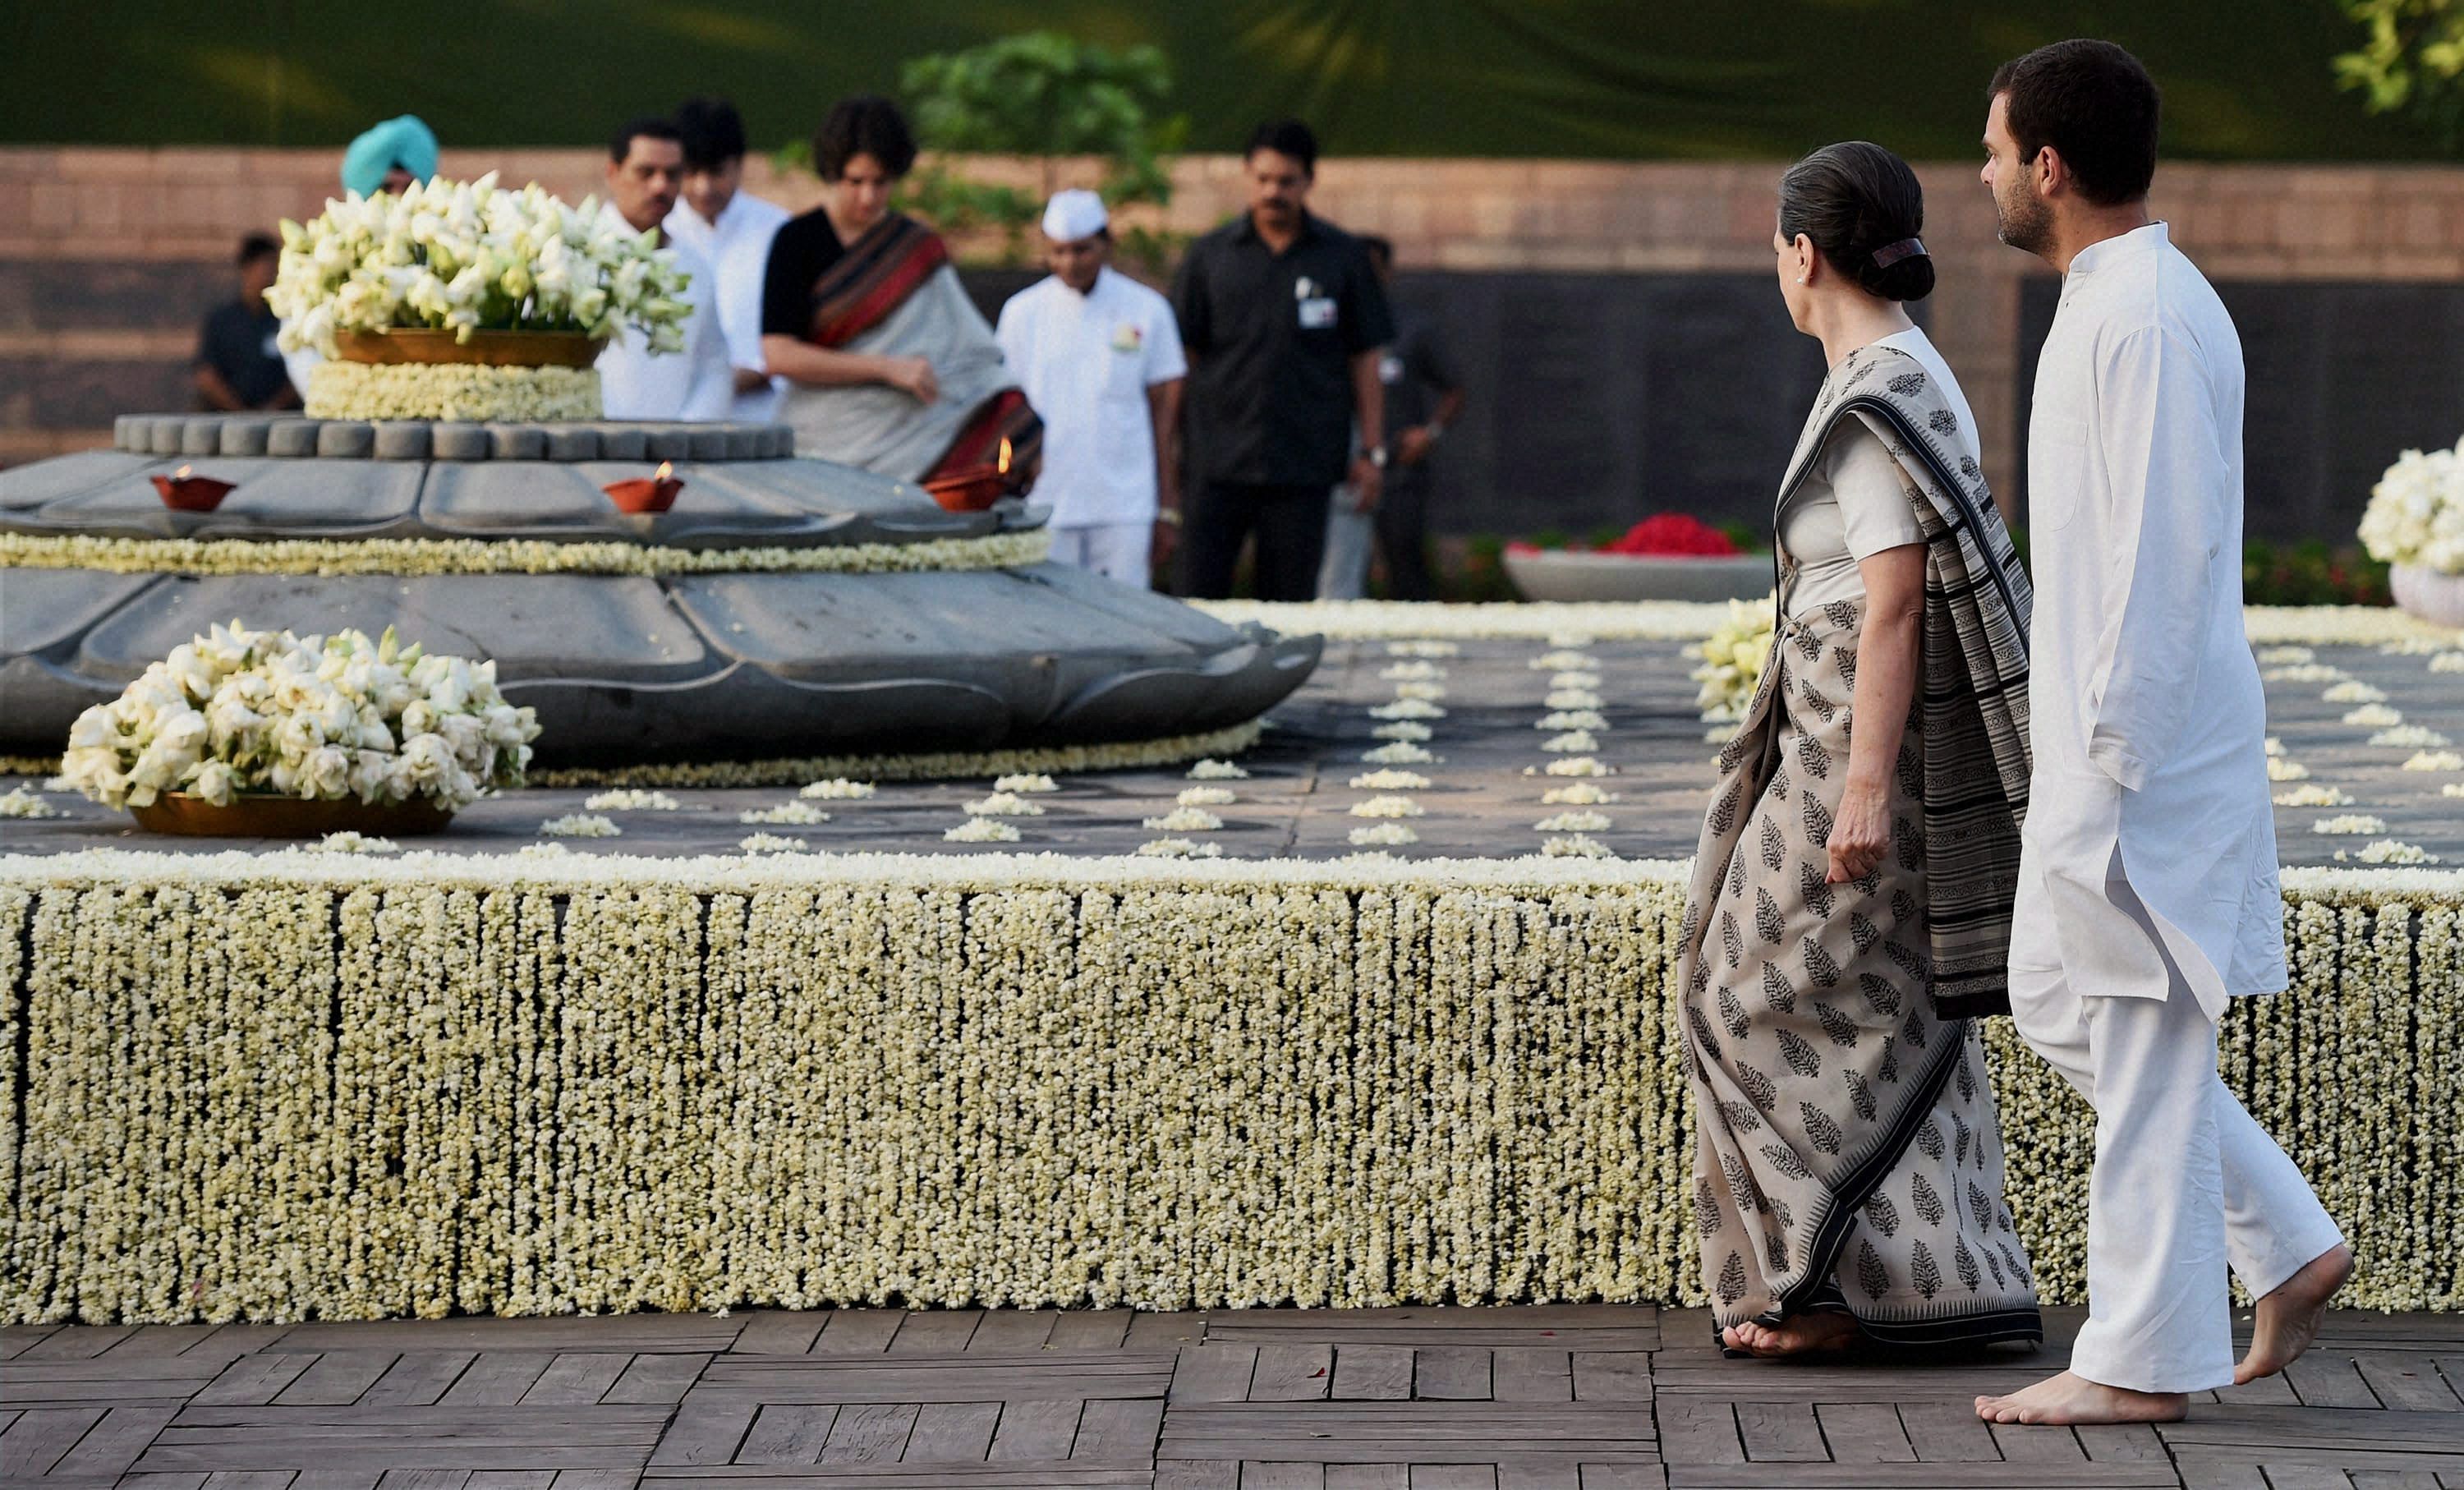 Congress President Sonia Gandhi and party vice president Rahul Gandhi arrive at Vir Bhumi to pay tributes to former Prime Minister Rajiv Gandhi on his 23rd death anniversary in New Delhi on Wednesday. PTI Photo